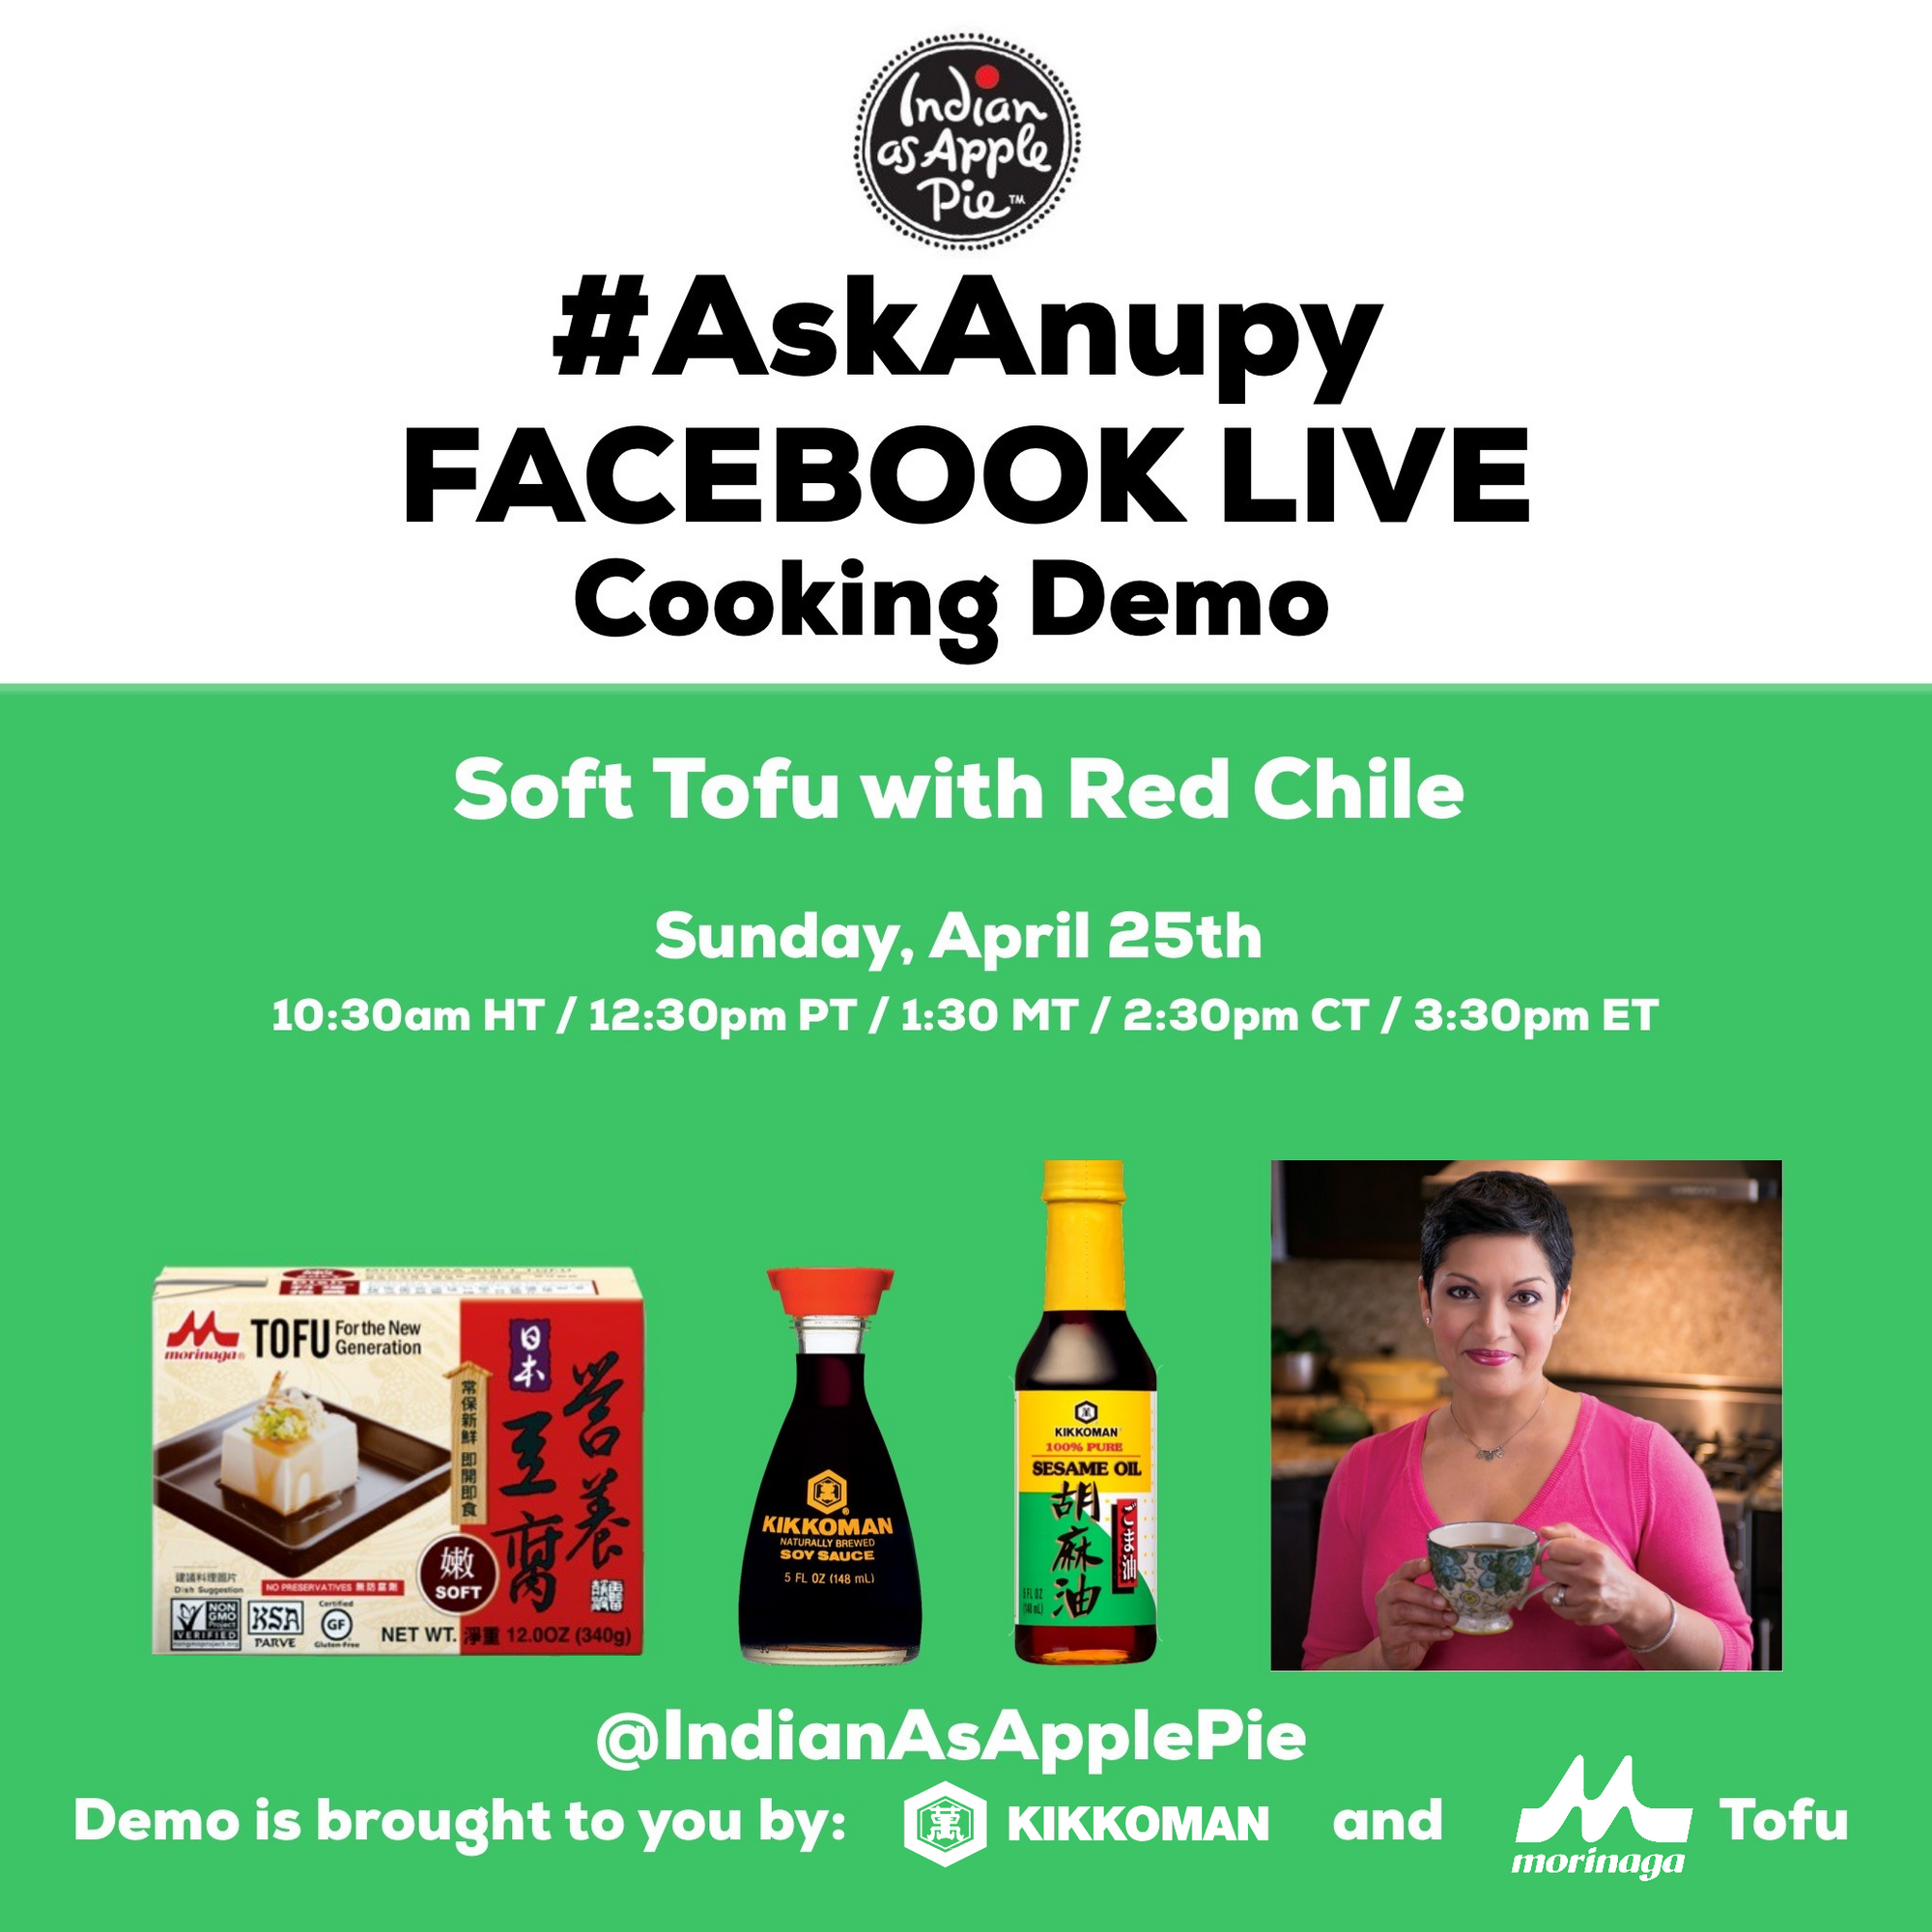 Facebook Live Cooking Class: Soft Tofu with Red Chile - Indian As Apple Pie